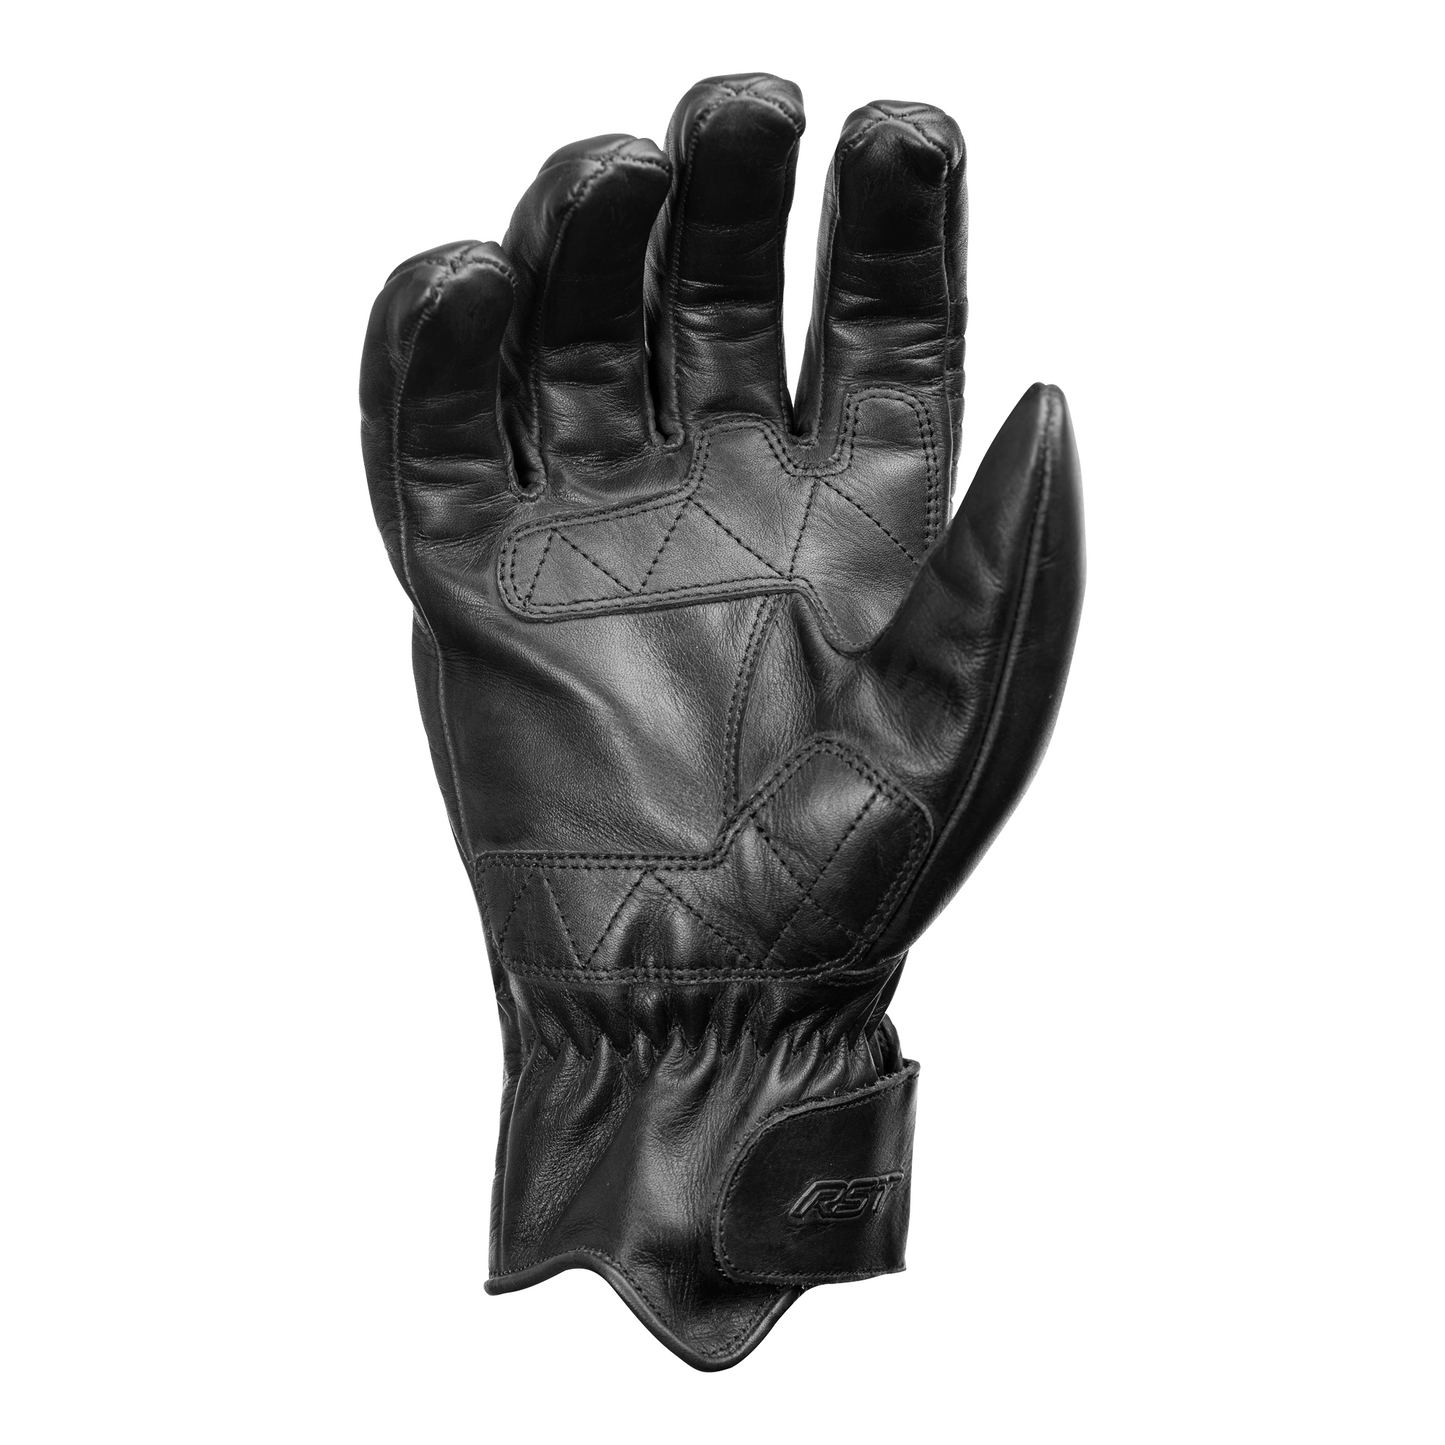 RST IOM TT Hillberry Classic Leather Riding Gloves - CE APPROVED - Black